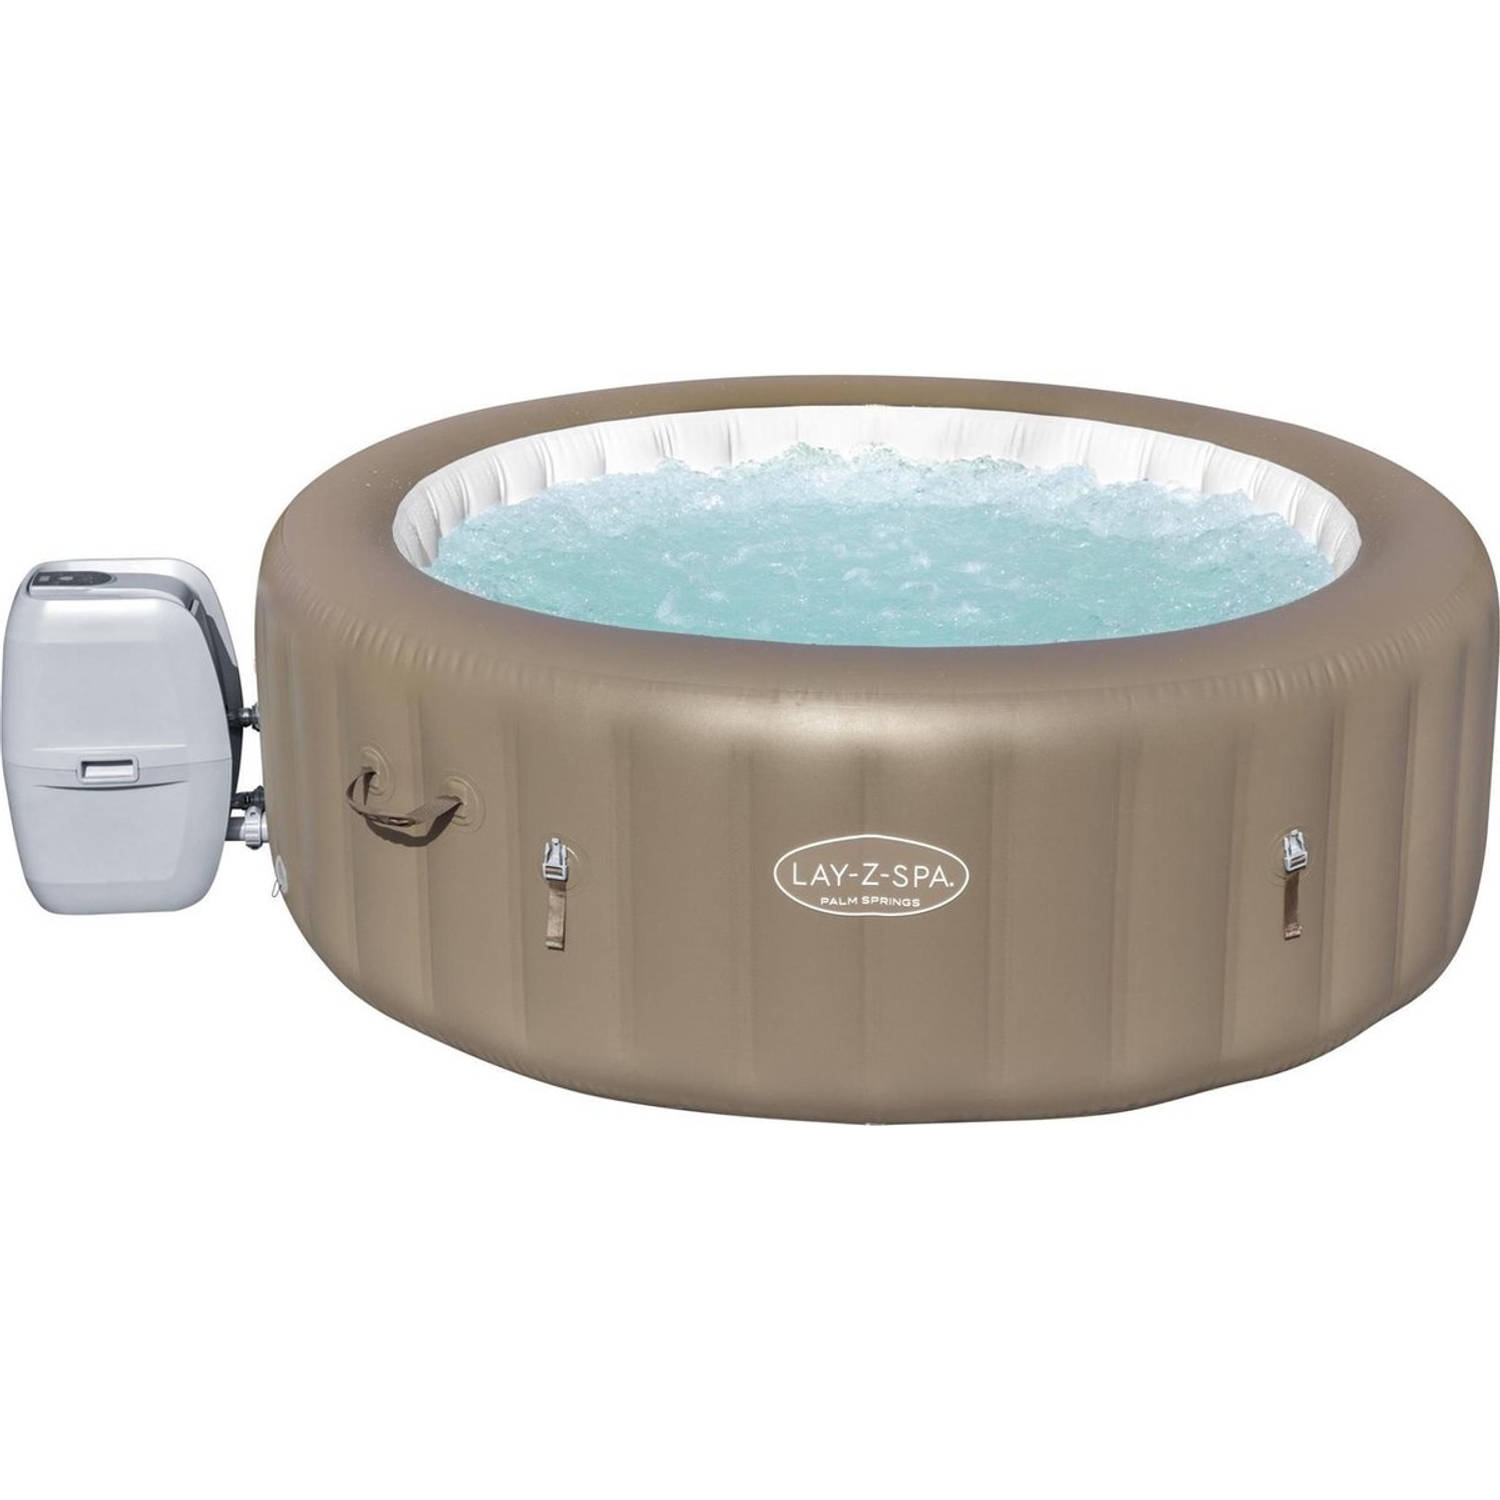 Lay-z-spa Palm Springs Max 6 Pers 140 Airjets Jacuzzi Bubbelbad Whirlpool Copy Copy